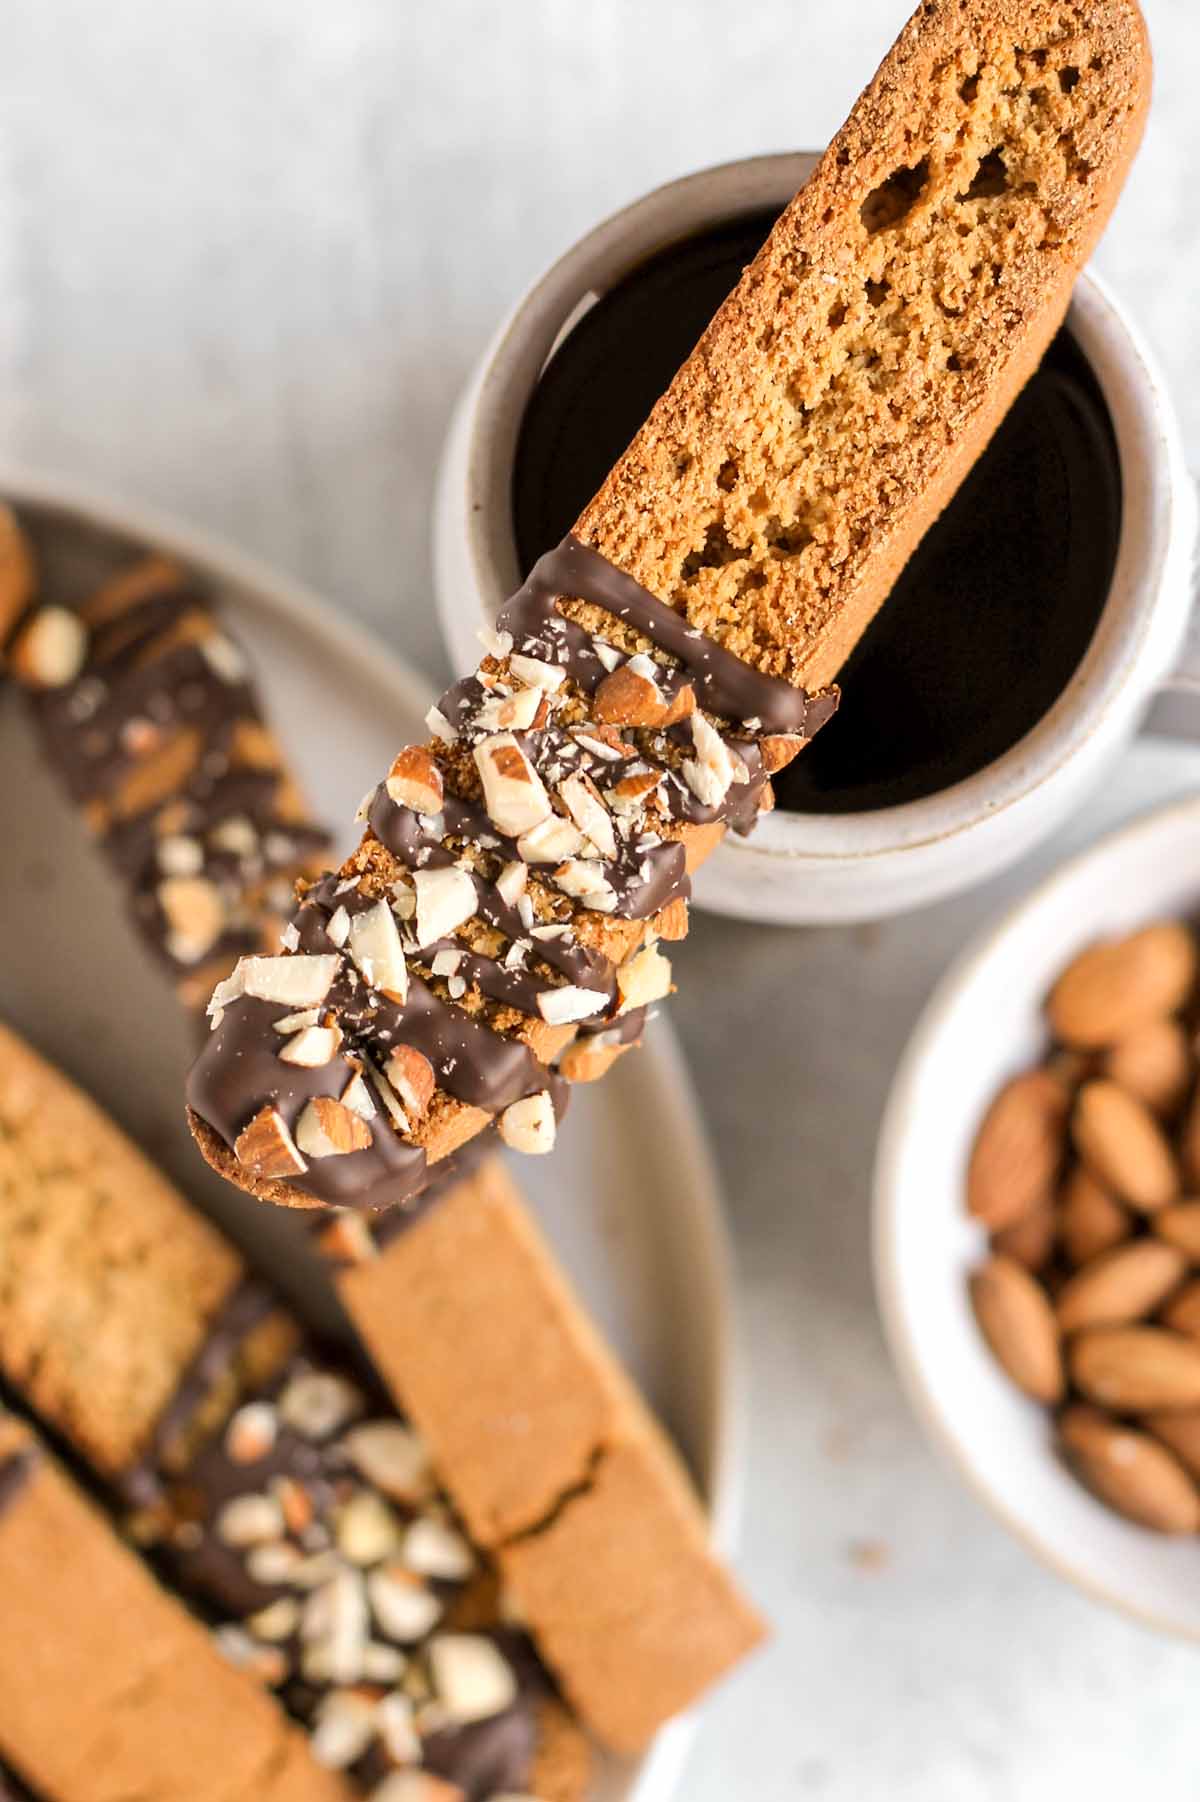 Single biscotti drizzled with chocolate and almond pieces laying onto of a cup of coffee with additional biscotti in the background.